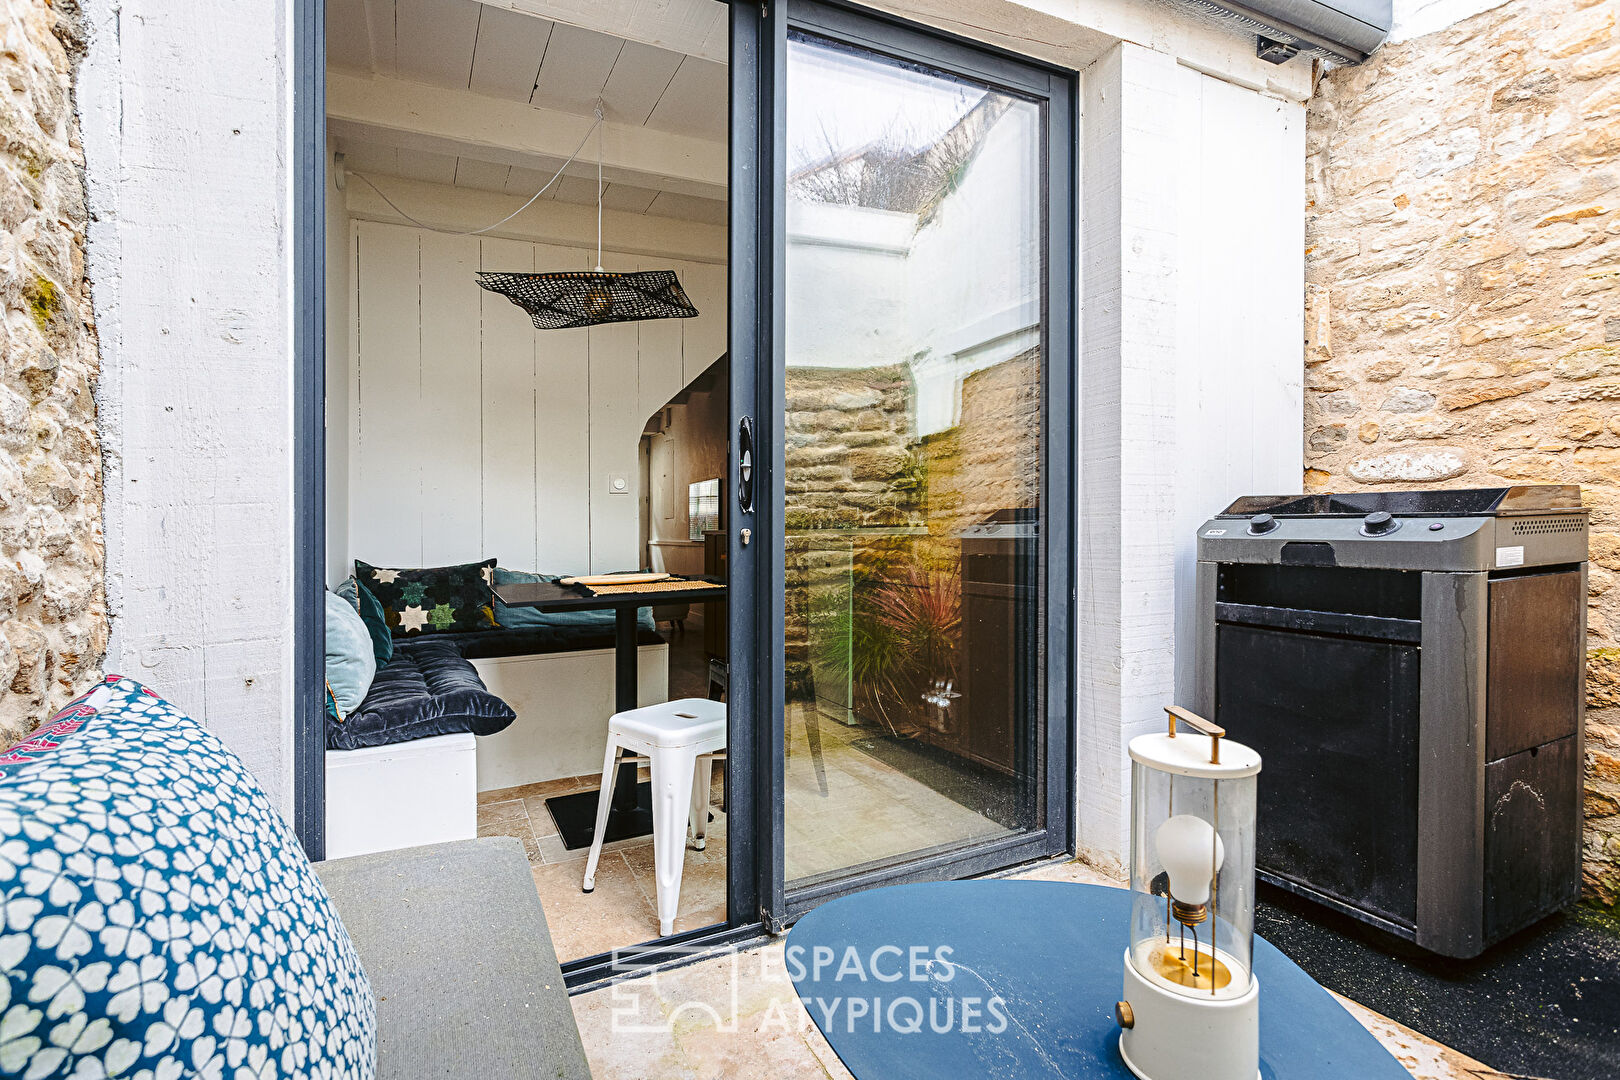 Summer pied-à-terre in the heart of the village